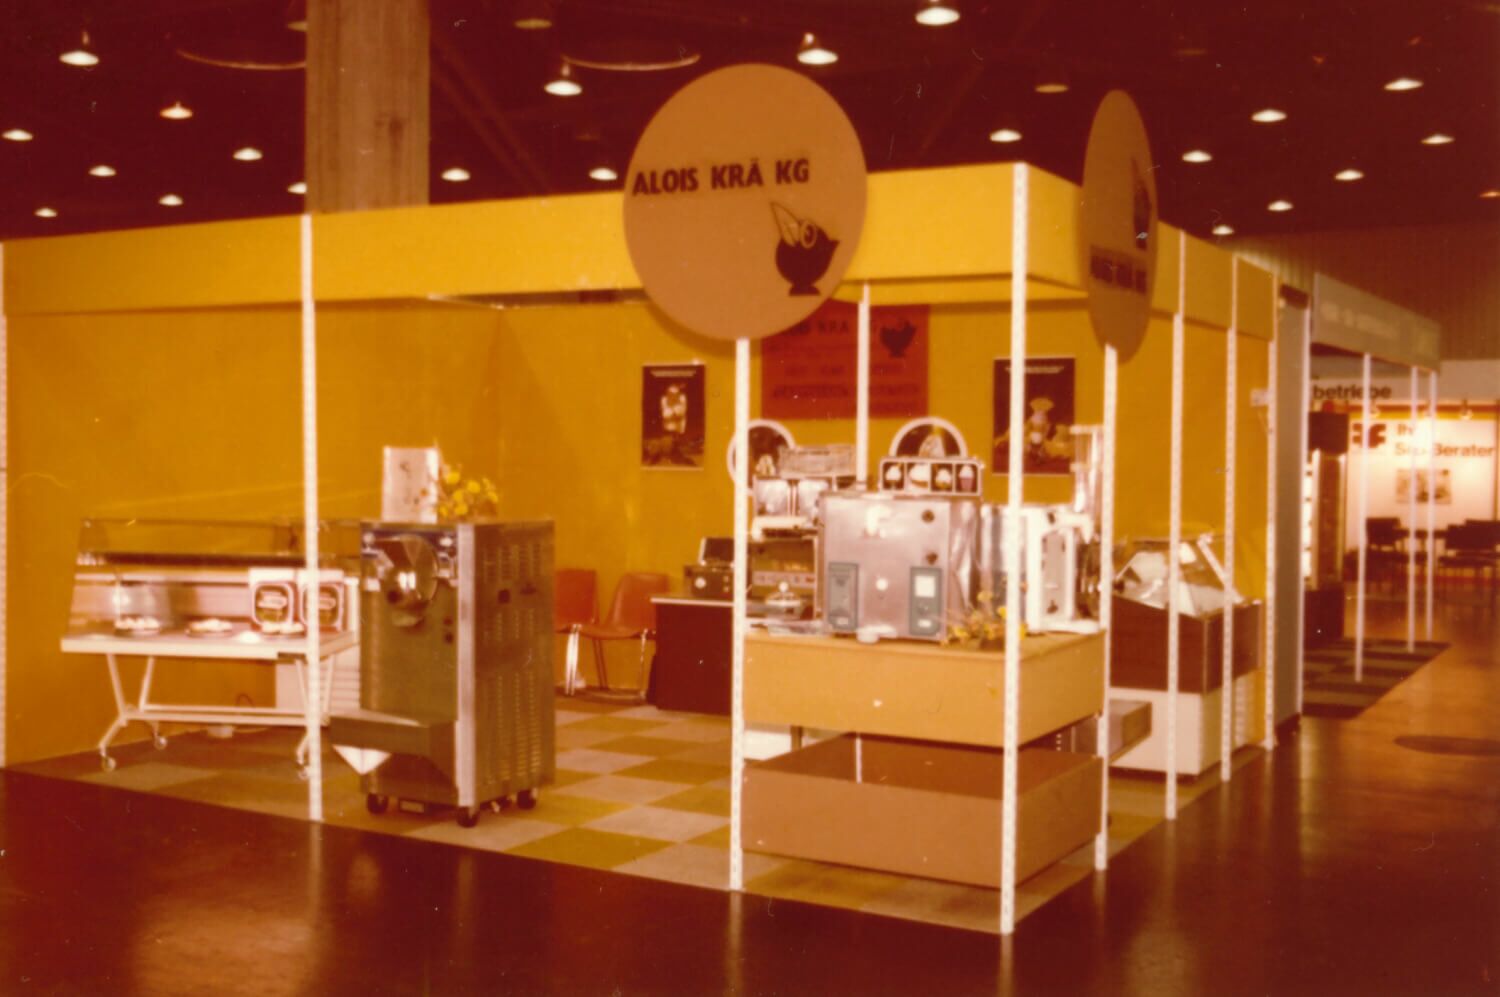 An Alois Krä exhibition stand from the 60s